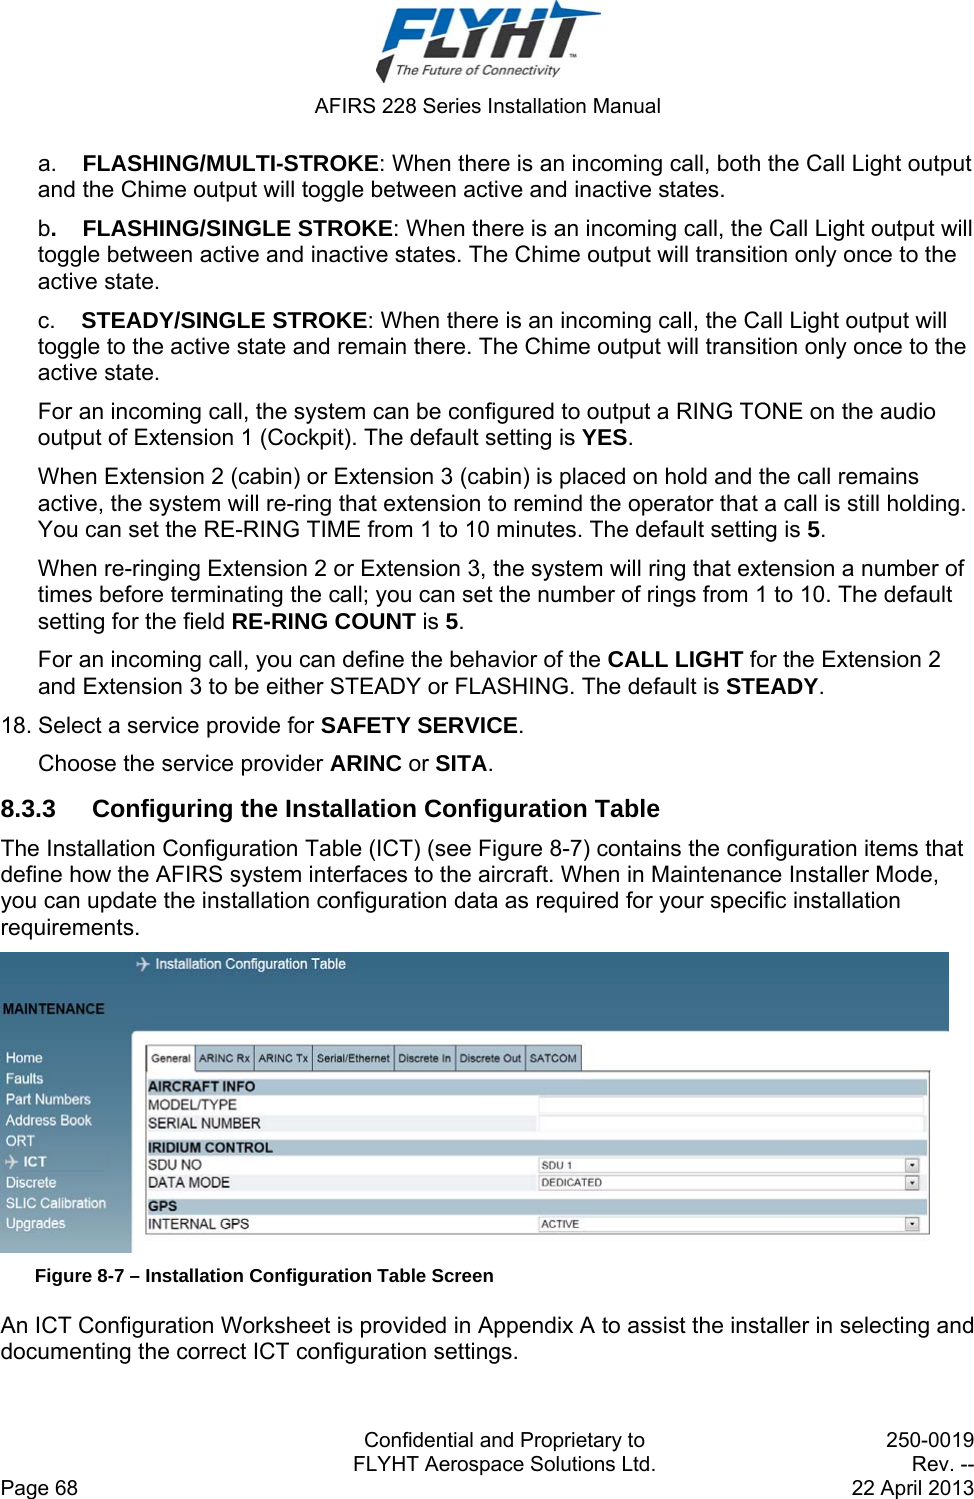  AFIRS 228 Series Installation Manual   Confidential and Proprietary to  250-0019   FLYHT Aerospace Solutions Ltd.  Rev. -- Page 68    22 April 2013 a.    FLASHING/MULTI-STROKE: When there is an incoming call, both the Call Light output and the Chime output will toggle between active and inactive states. b.    FLASHING/SINGLE STROKE: When there is an incoming call, the Call Light output will toggle between active and inactive states. The Chime output will transition only once to the active state. c.    STEADY/SINGLE STROKE: When there is an incoming call, the Call Light output will toggle to the active state and remain there. The Chime output will transition only once to the active state. For an incoming call, the system can be configured to output a RING TONE on the audio output of Extension 1 (Cockpit). The default setting is YES. When Extension 2 (cabin) or Extension 3 (cabin) is placed on hold and the call remains active, the system will re-ring that extension to remind the operator that a call is still holding. You can set the RE-RING TIME from 1 to 10 minutes. The default setting is 5. When re-ringing Extension 2 or Extension 3, the system will ring that extension a number of times before terminating the call; you can set the number of rings from 1 to 10. The default setting for the field RE-RING COUNT is 5. For an incoming call, you can define the behavior of the CALL LIGHT for the Extension 2 and Extension 3 to be either STEADY or FLASHING. The default is STEADY. 18. Select a service provide for SAFETY SERVICE.  Choose the service provider ARINC or SITA. 8.3.3  Configuring the Installation Configuration Table The Installation Configuration Table (ICT) (see Figure 8-7) contains the configuration items that define how the AFIRS system interfaces to the aircraft. When in Maintenance Installer Mode, you can update the installation configuration data as required for your specific installation requirements.   Figure 8-7 – Installation Configuration Table Screen An ICT Configuration Worksheet is provided in Appendix A to assist the installer in selecting and documenting the correct ICT configuration settings.  